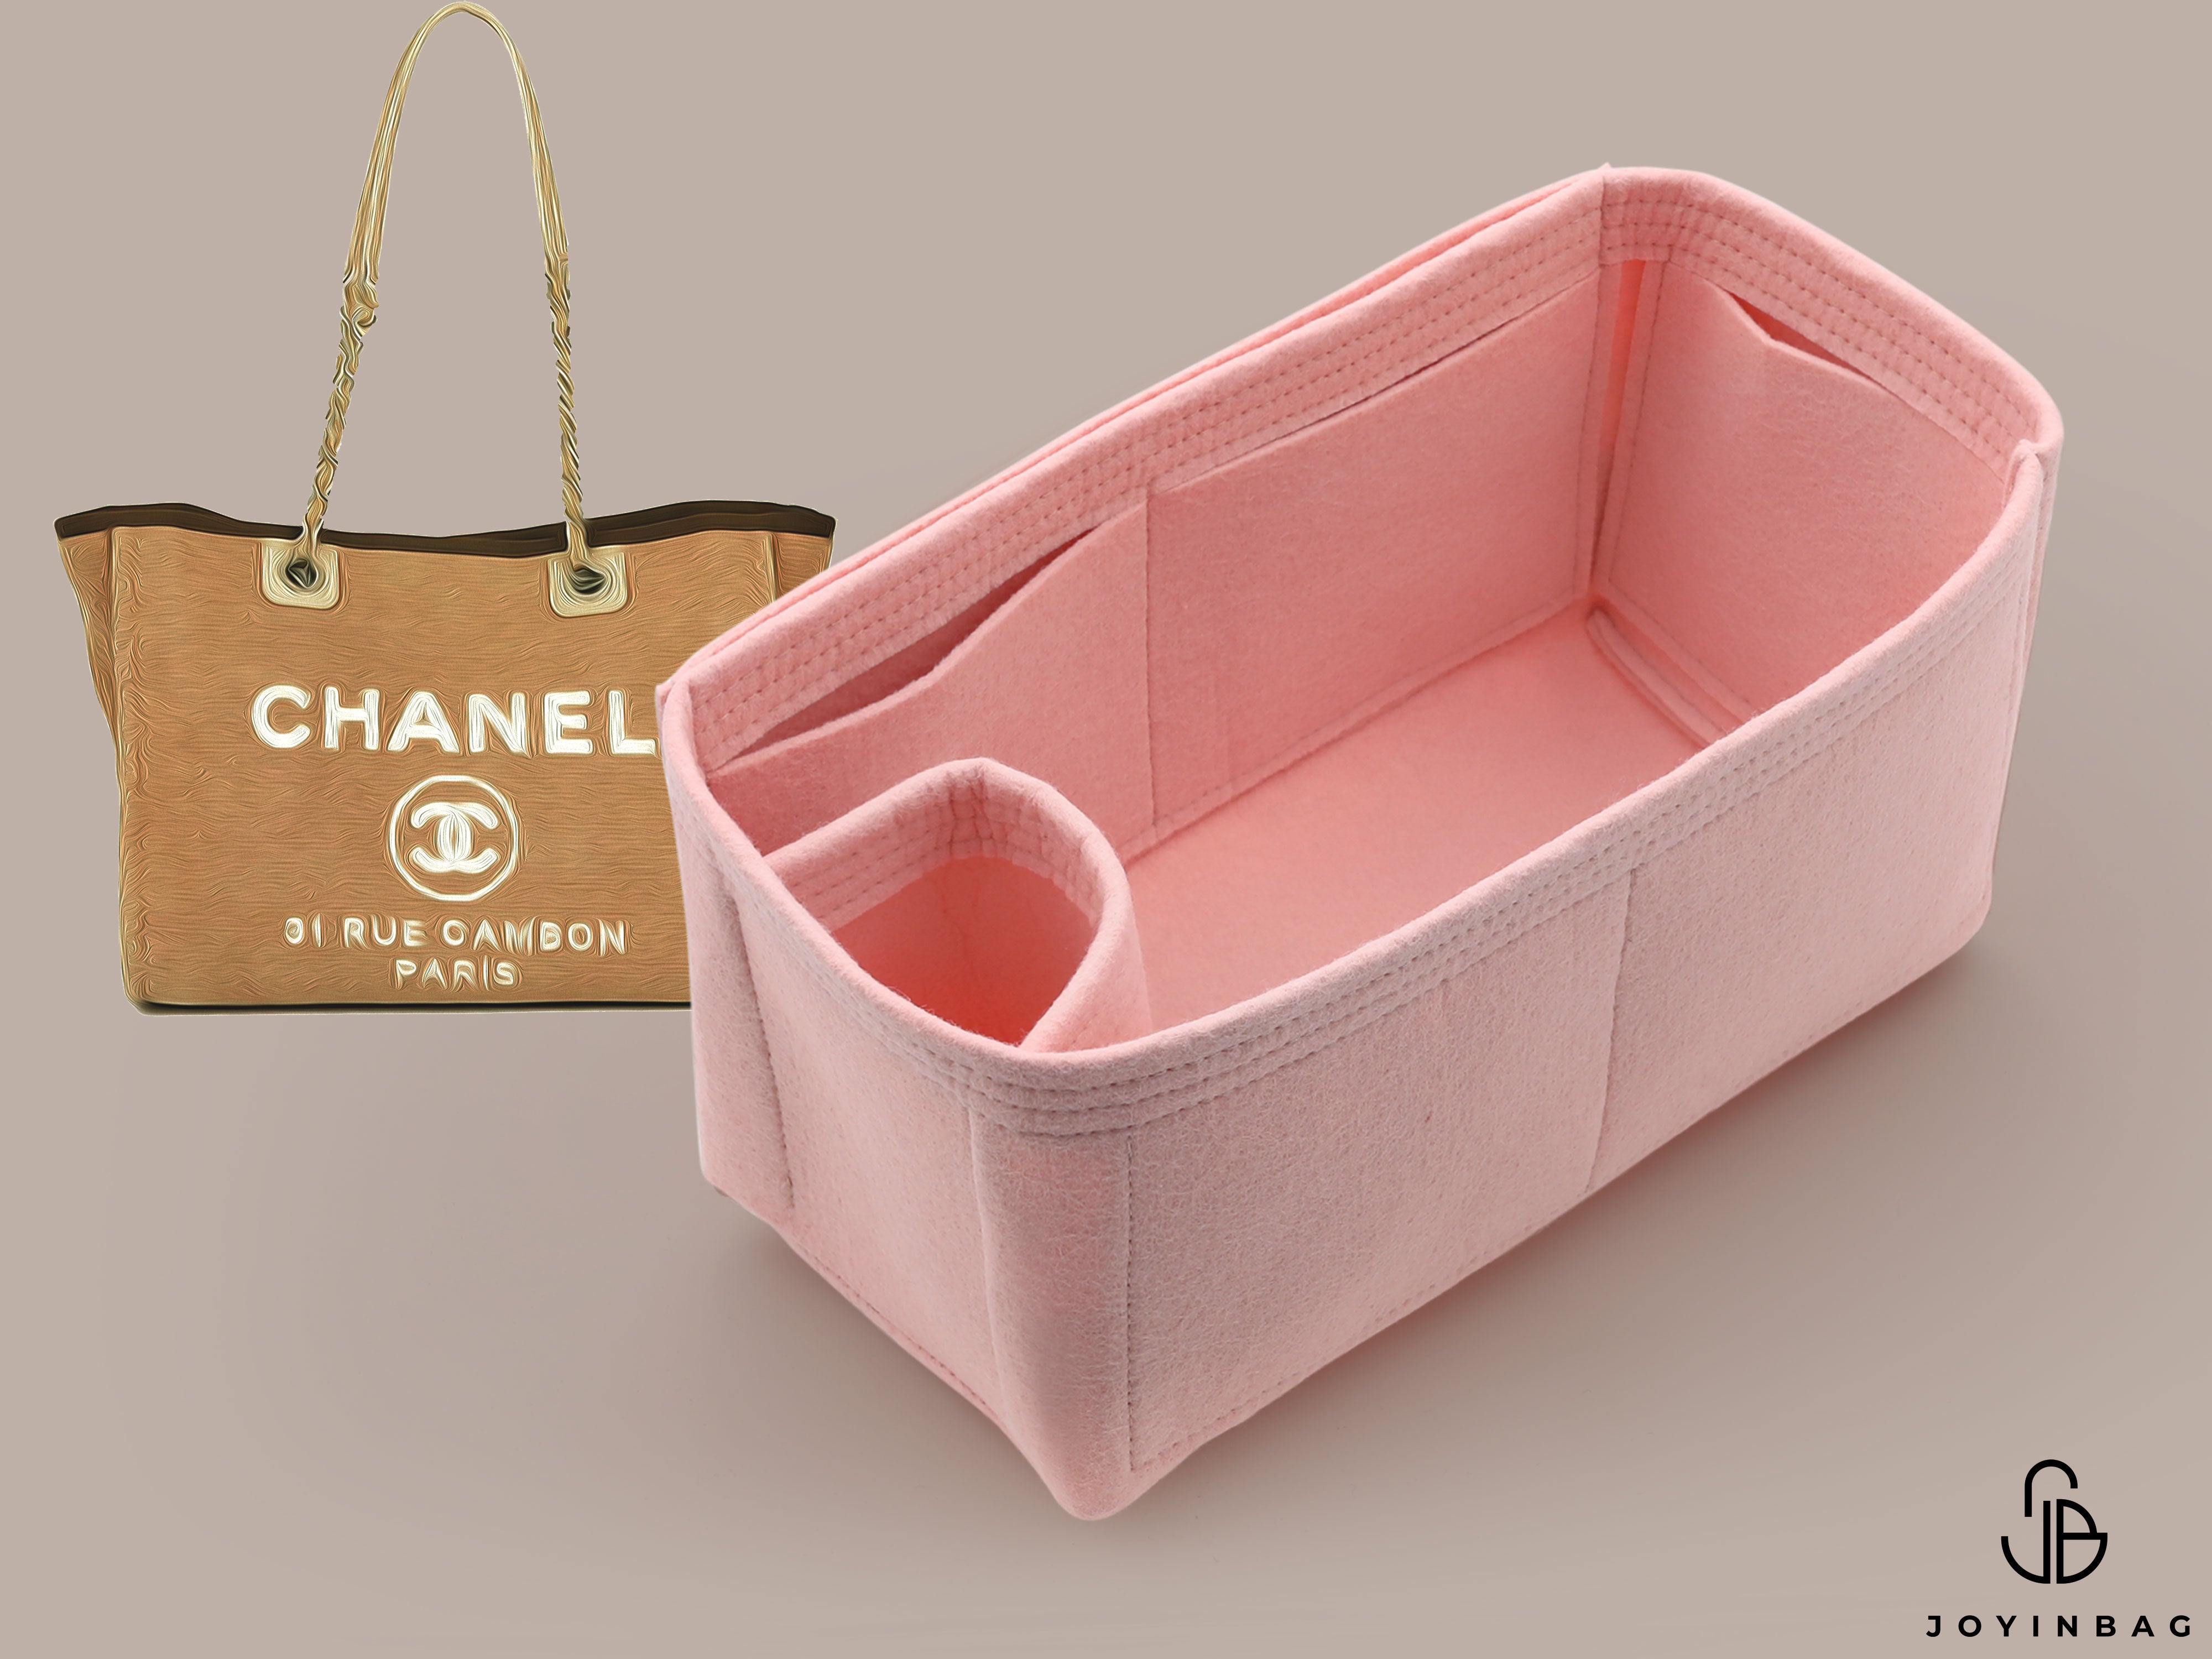 bag organizer for chanel deauville tote